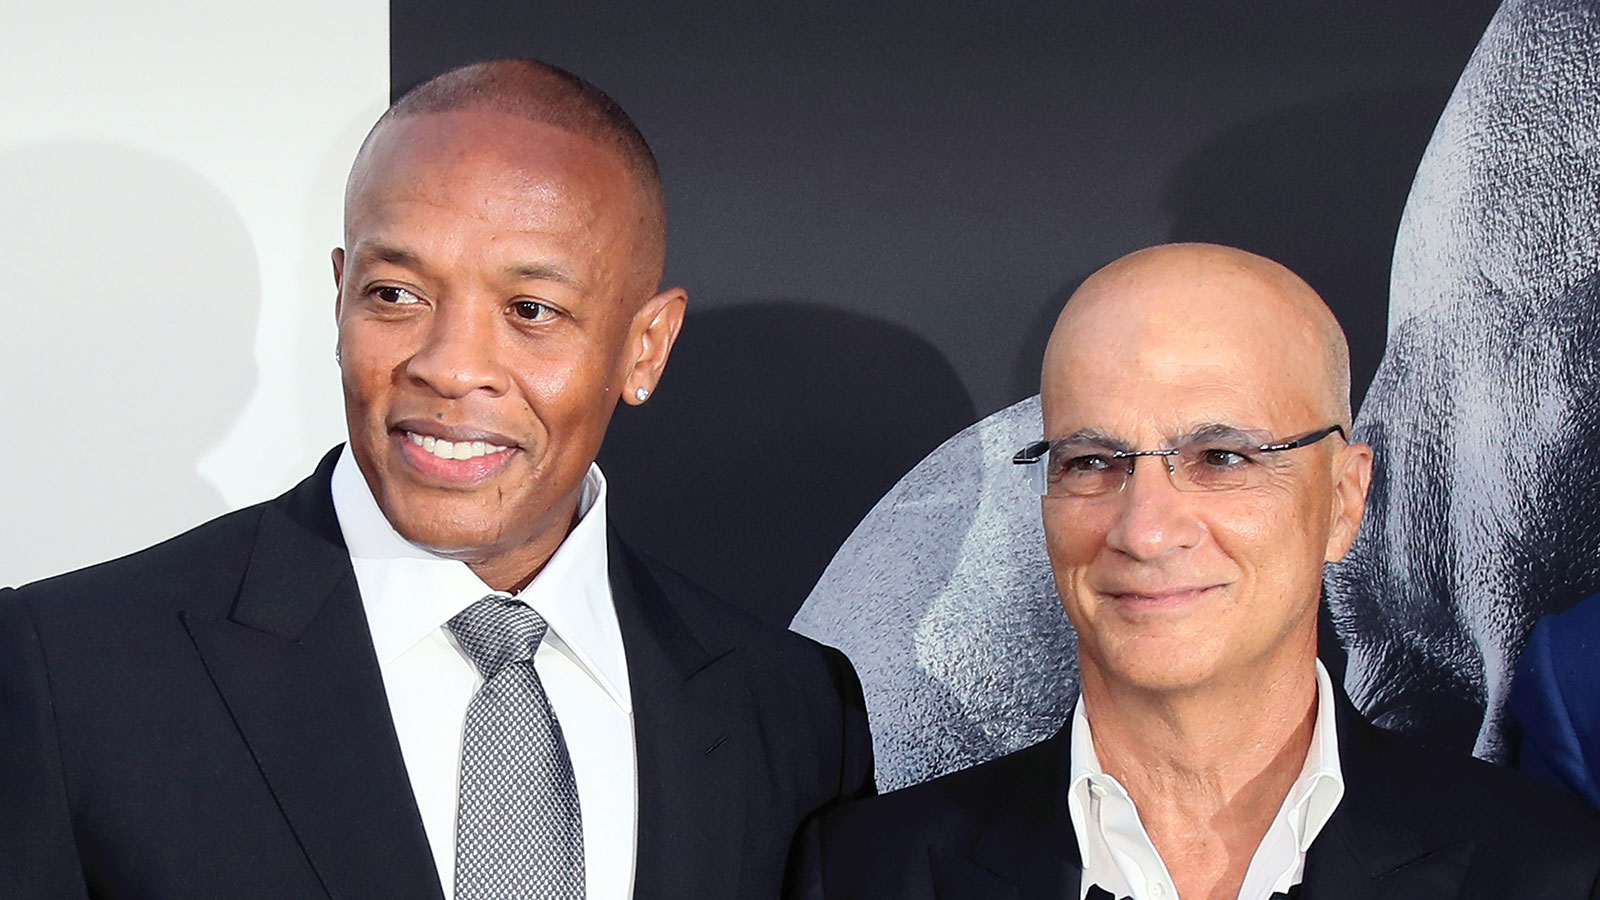 Dr. Dre and Jimmy Iovine (Photo: David Livingston/Getty Images)